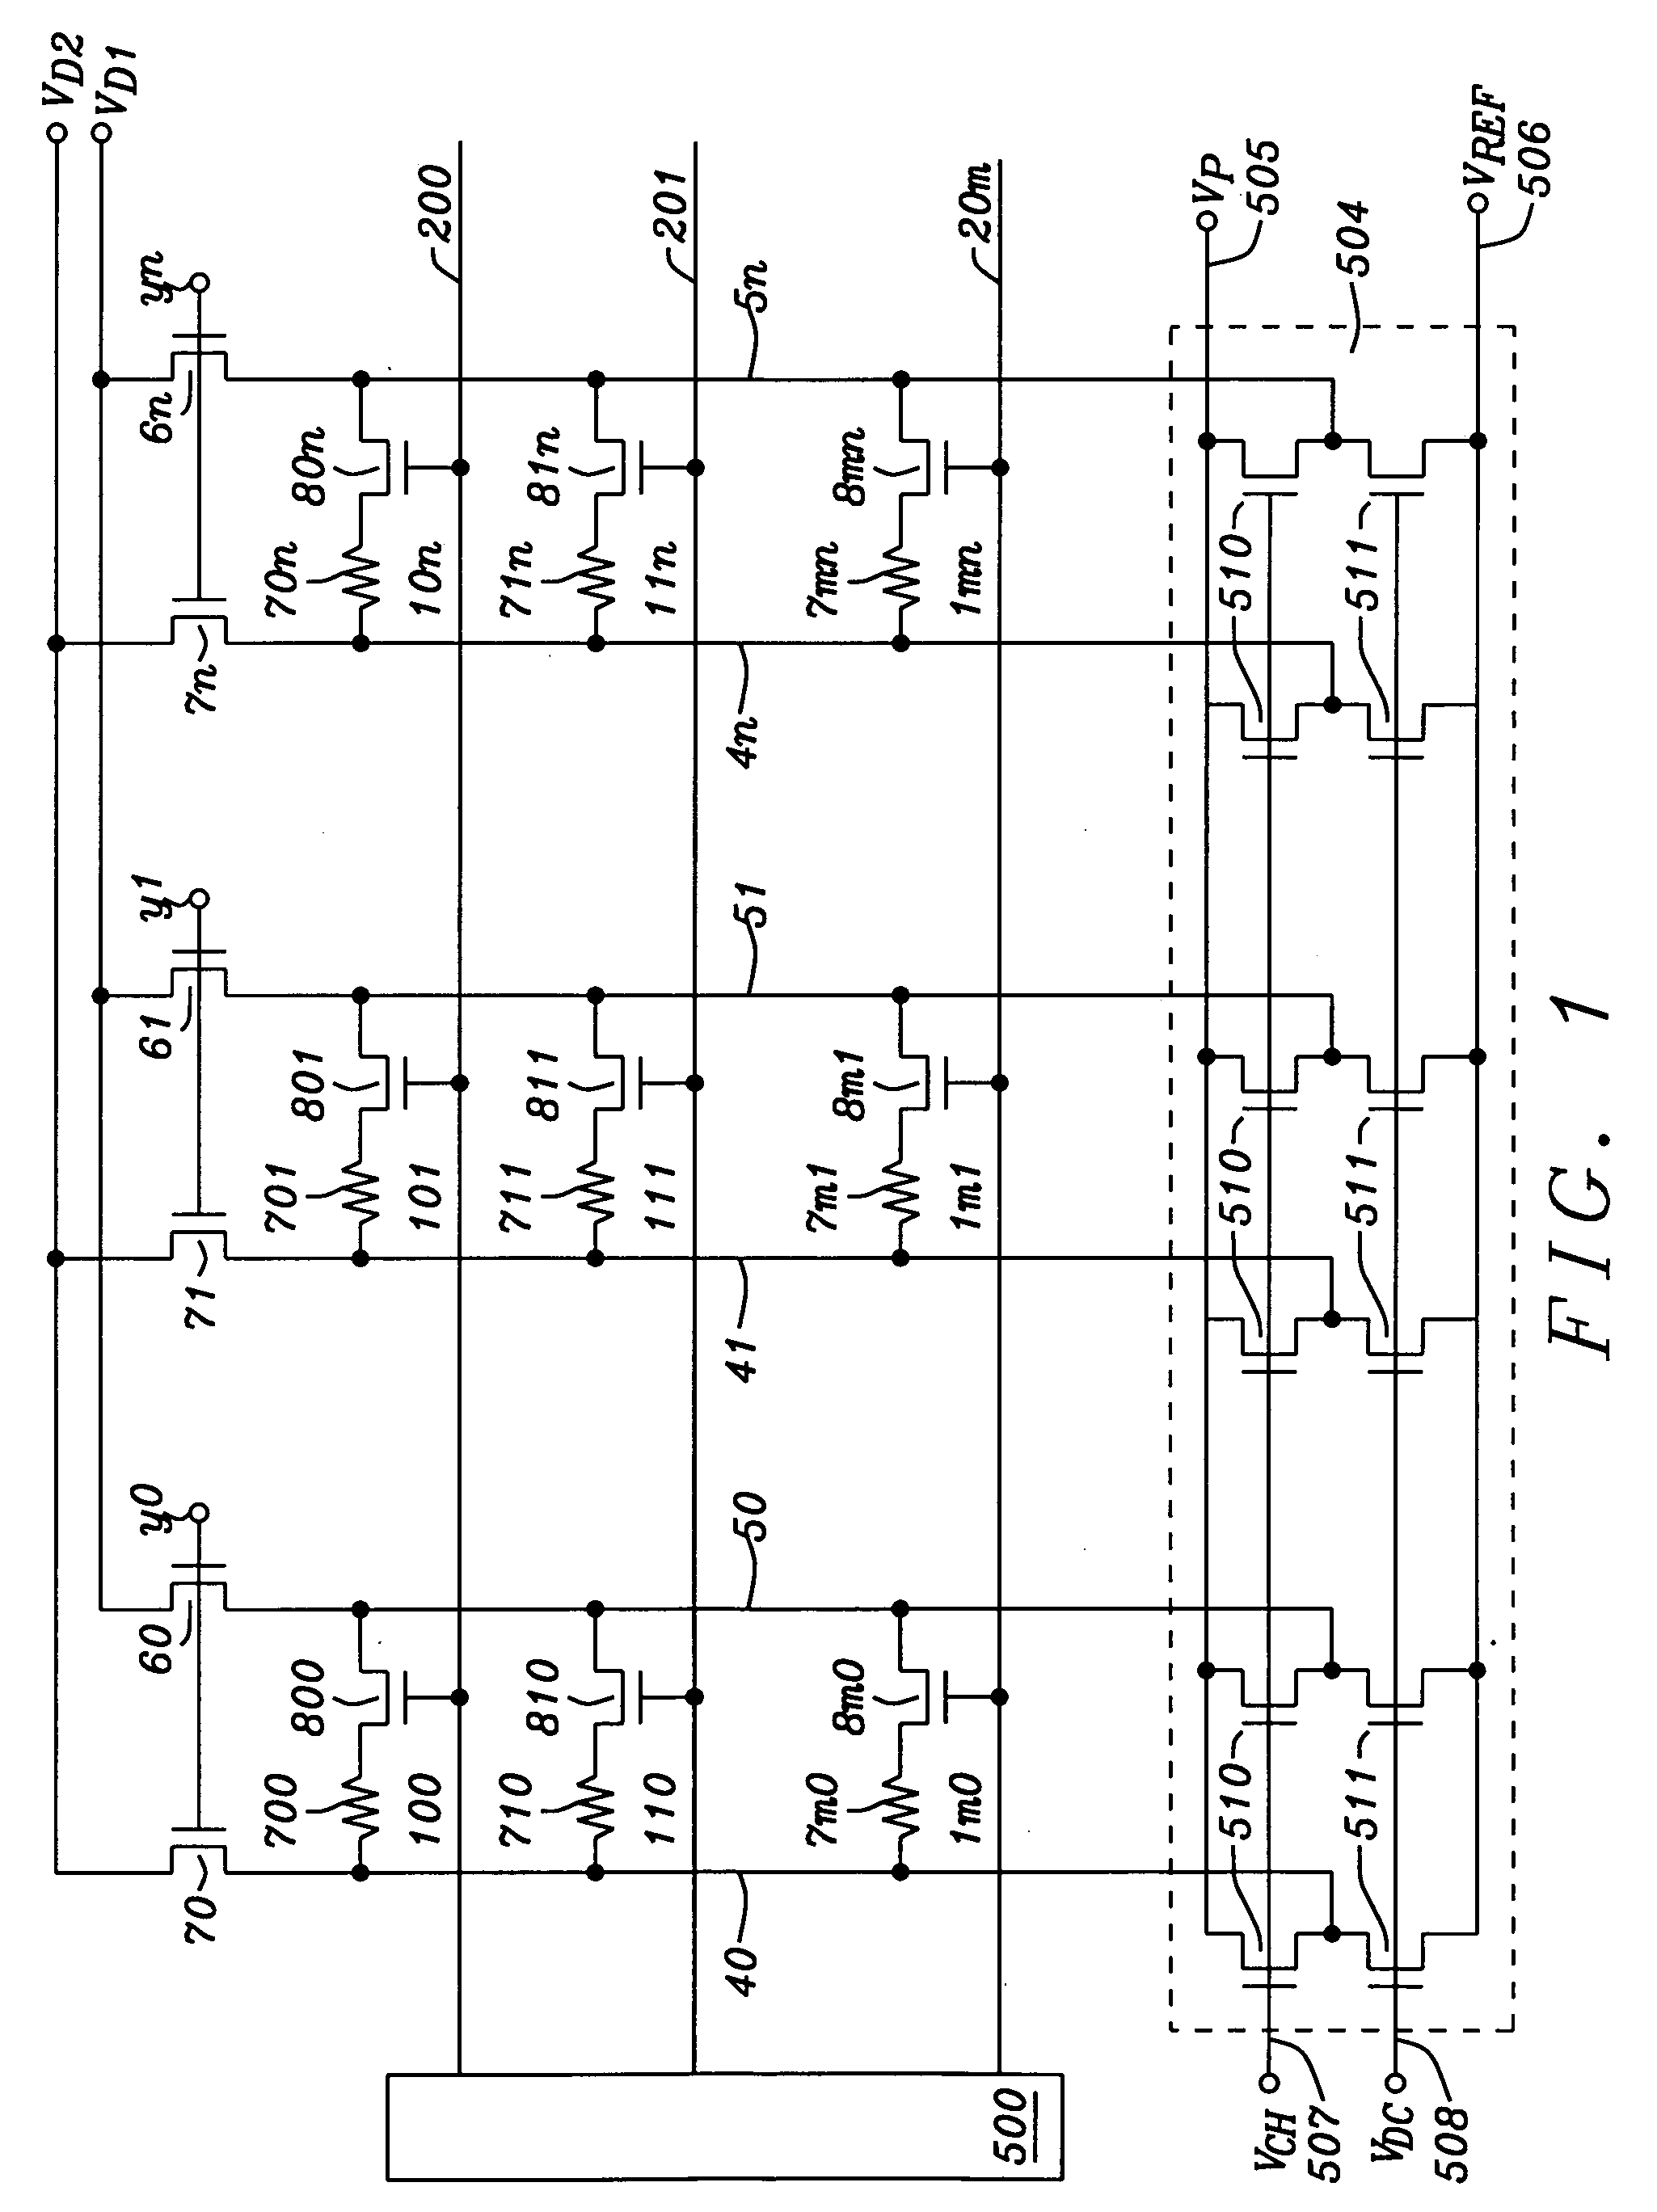 Gate drive voltage boost schemes for memory array